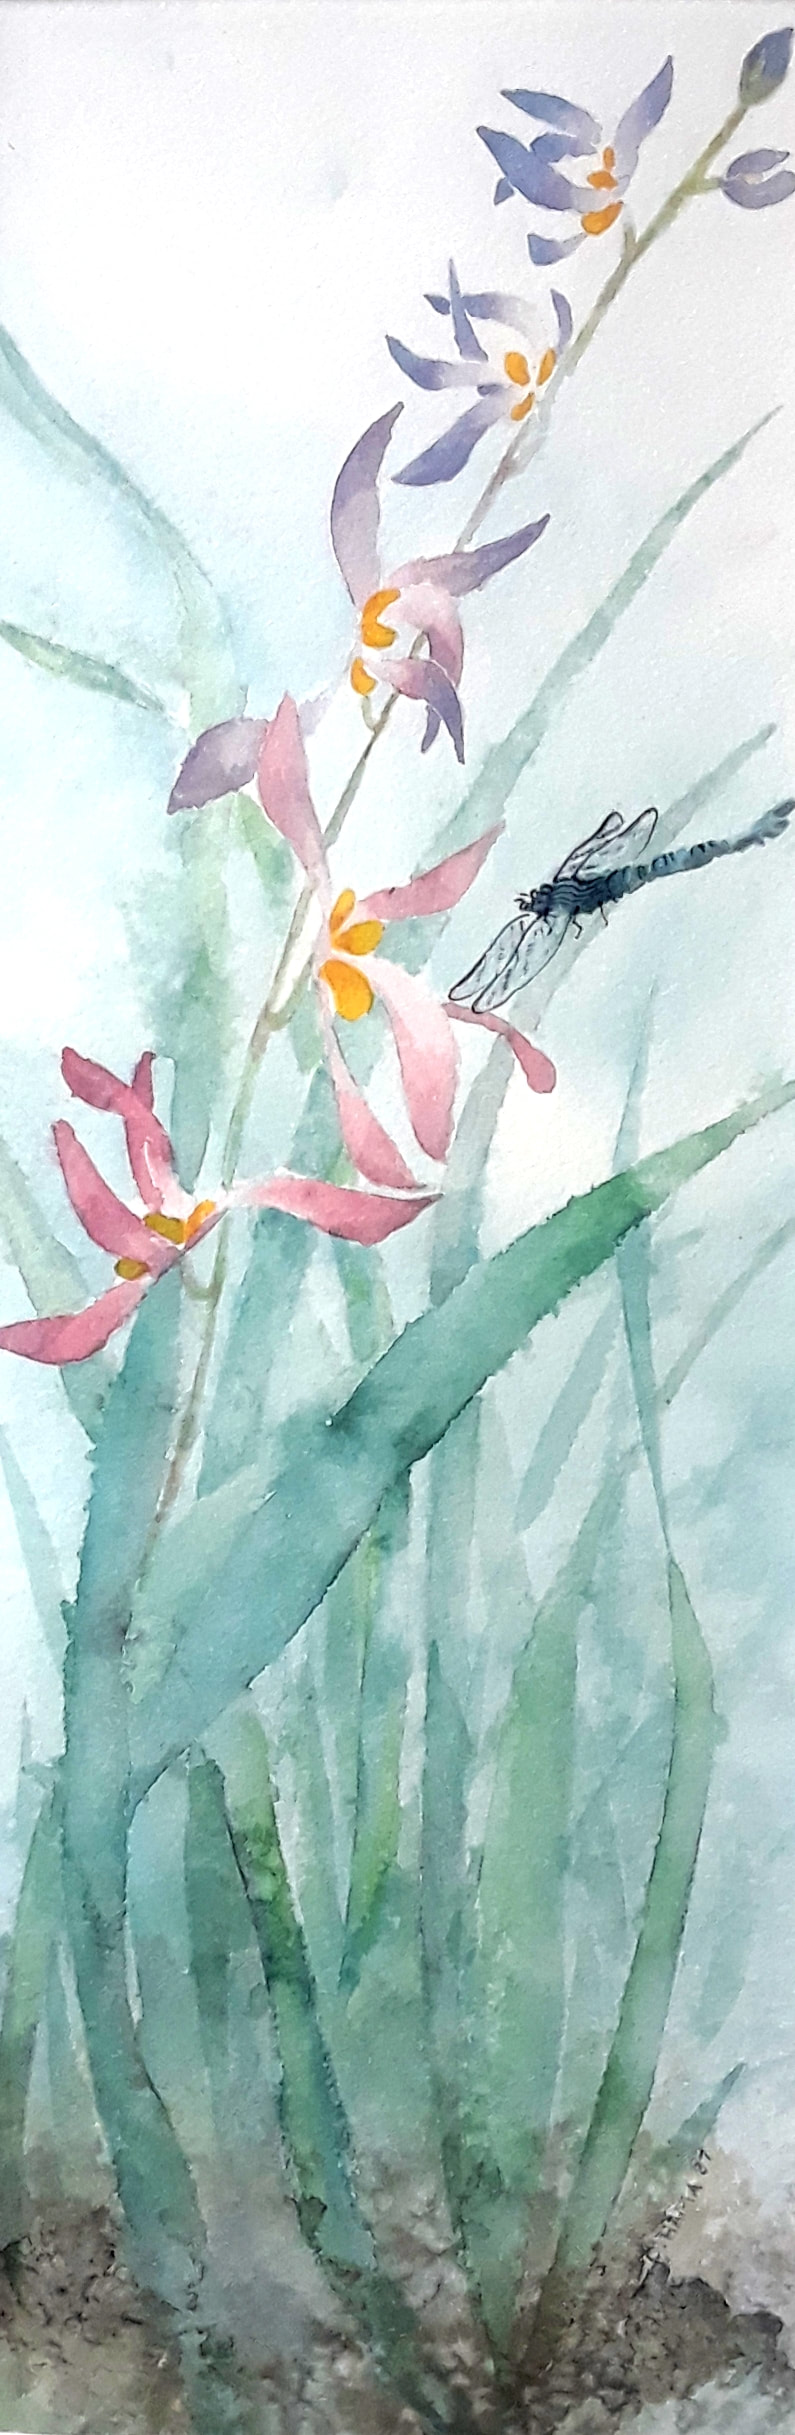 A sparay of pink Pastel orchids with a black dragon fly in Sumi-e style